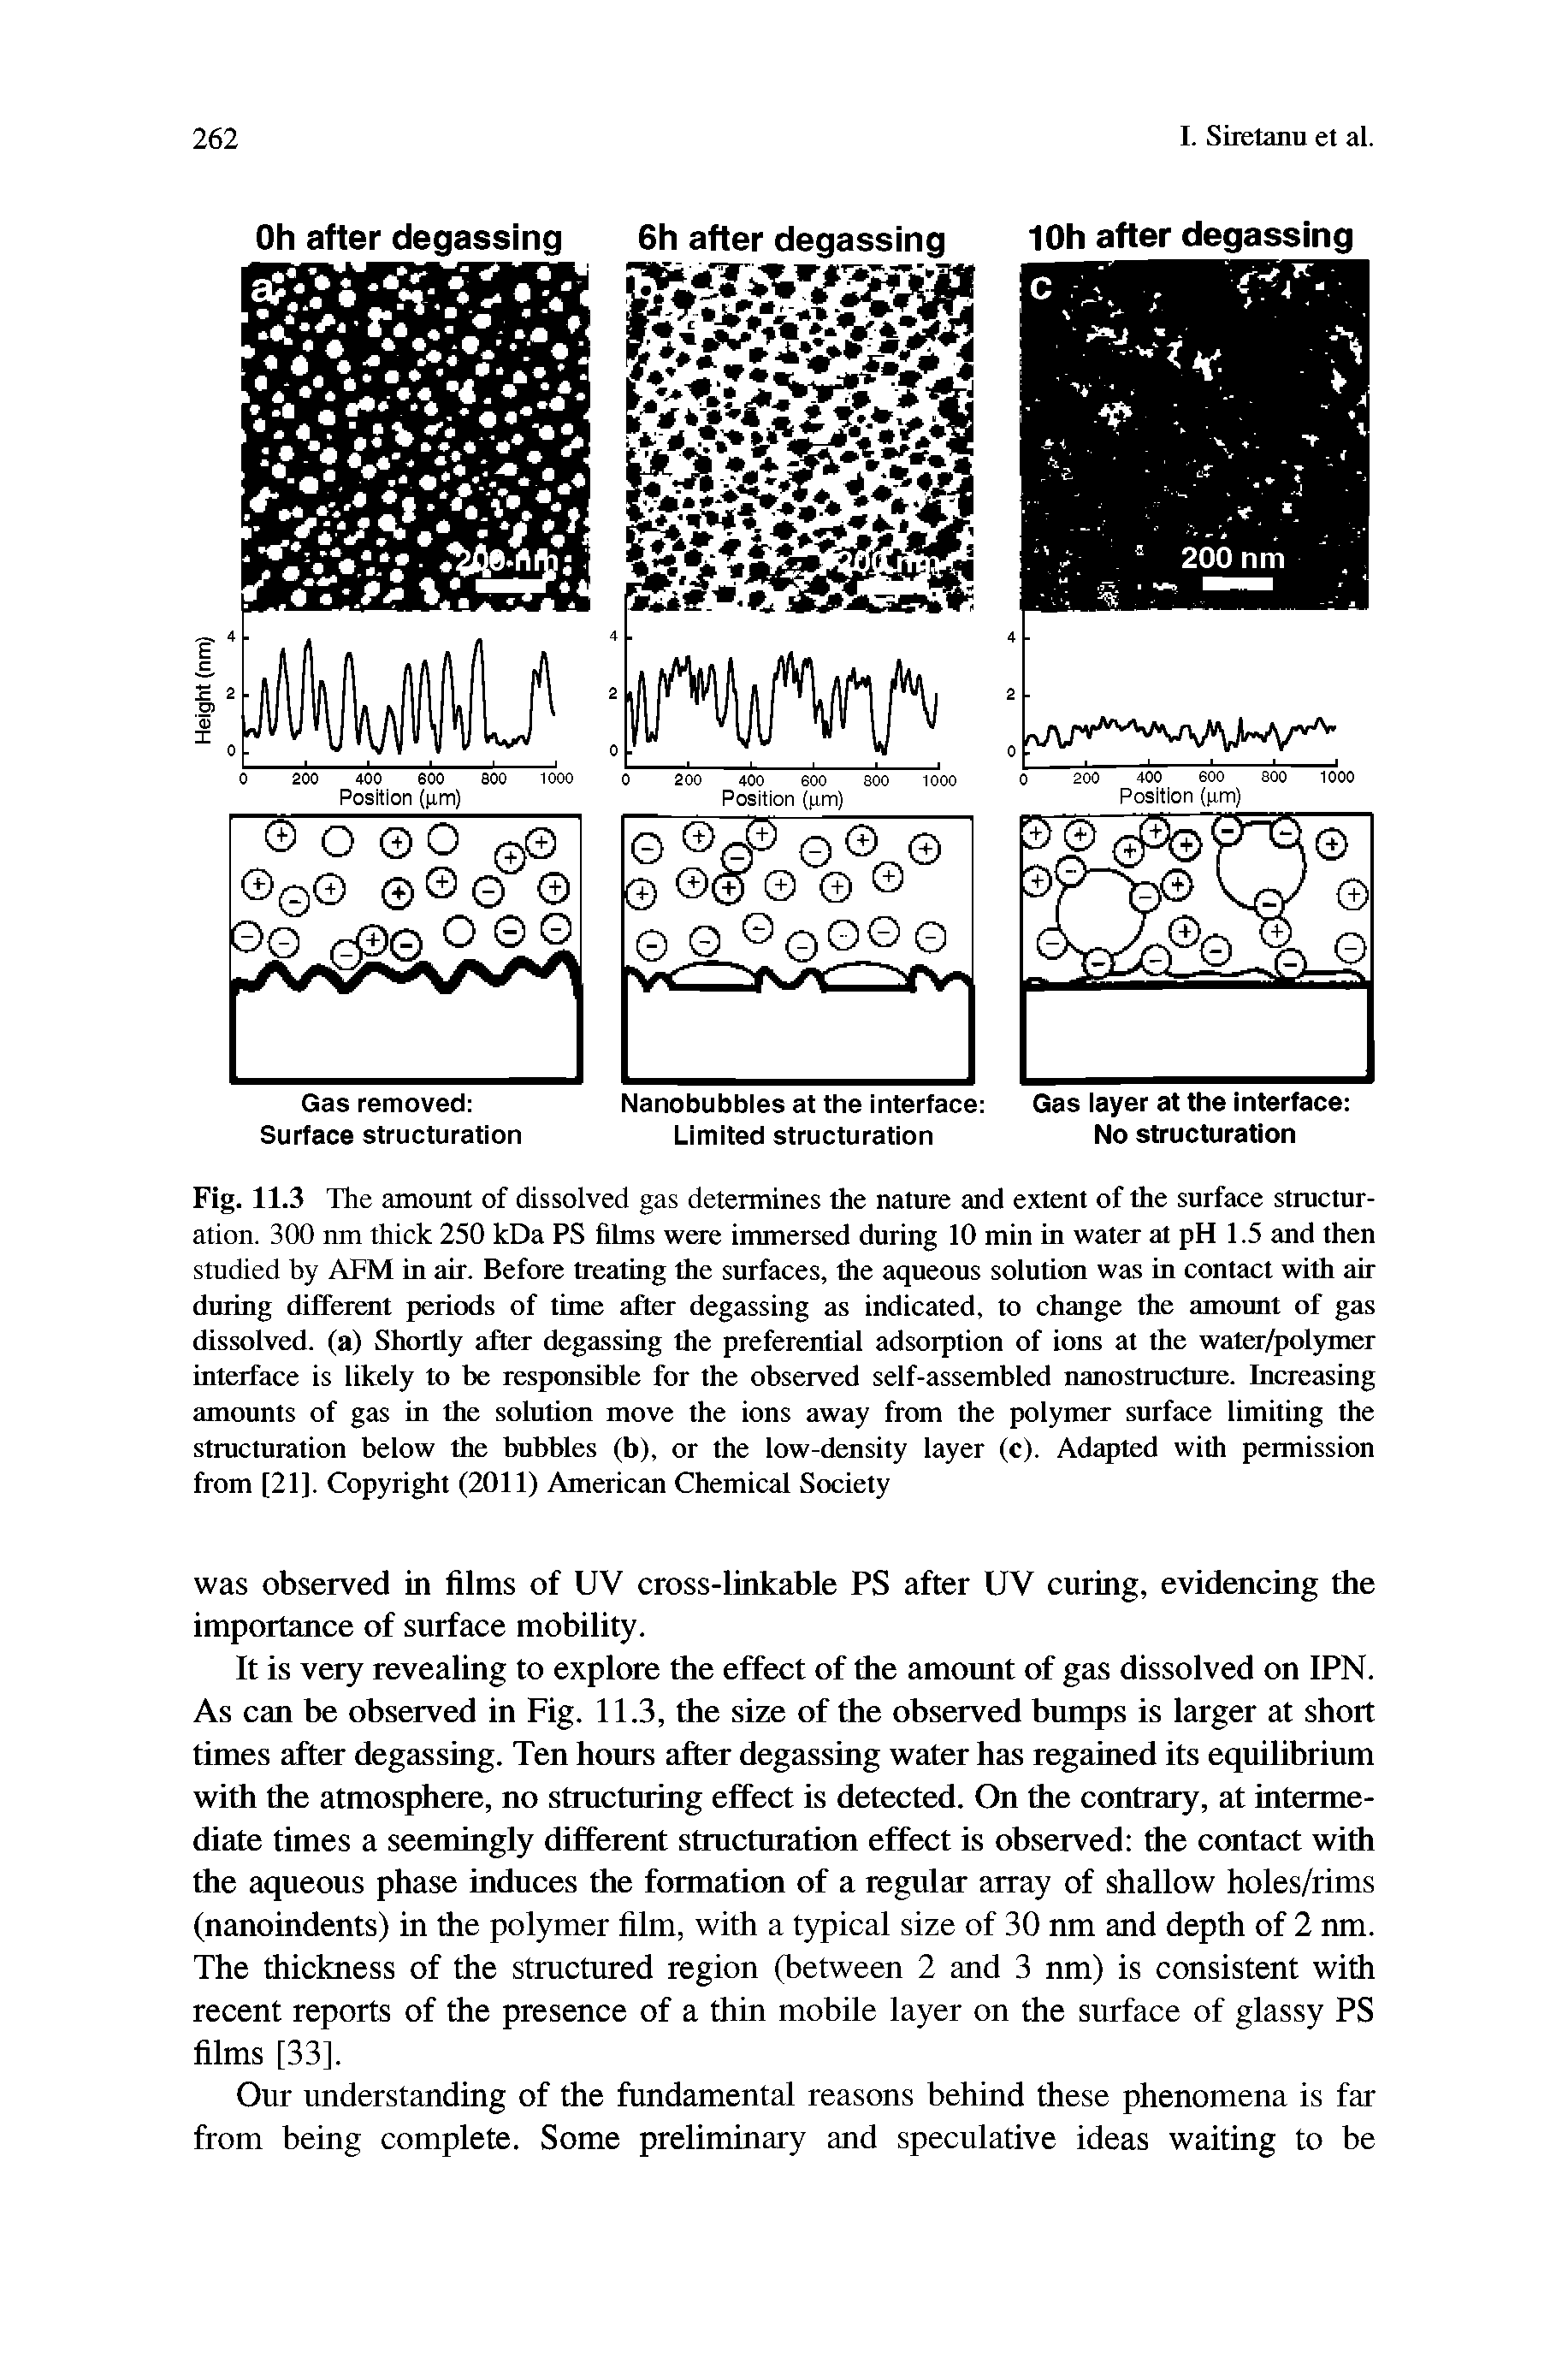 Fig. 11.3 The amount of dissolved gas determines the nature and extent of the surface structuration. 300 nm thick 250 kDa PS films were immersed during 10 min in water at pH 1.5 and then studied by AFM in air. Before treating the surfaces, the aqueous soiutirai was in contact with air during different periods of time after degassing as indicated, to change the amount of gas dissolved, (a) Shortly after degassing the preferential adsorption of ions at the water/polymer interface is likely to be responsible for the observed self-assembled nanostructure. Increasing amounts of gas in the solution move the ions away from the polymer surface limiting the structuration below the bubbles (b), or the low-density layer (c). Adapted with permission from [21]. Copyright (2011) American Chemical Society...